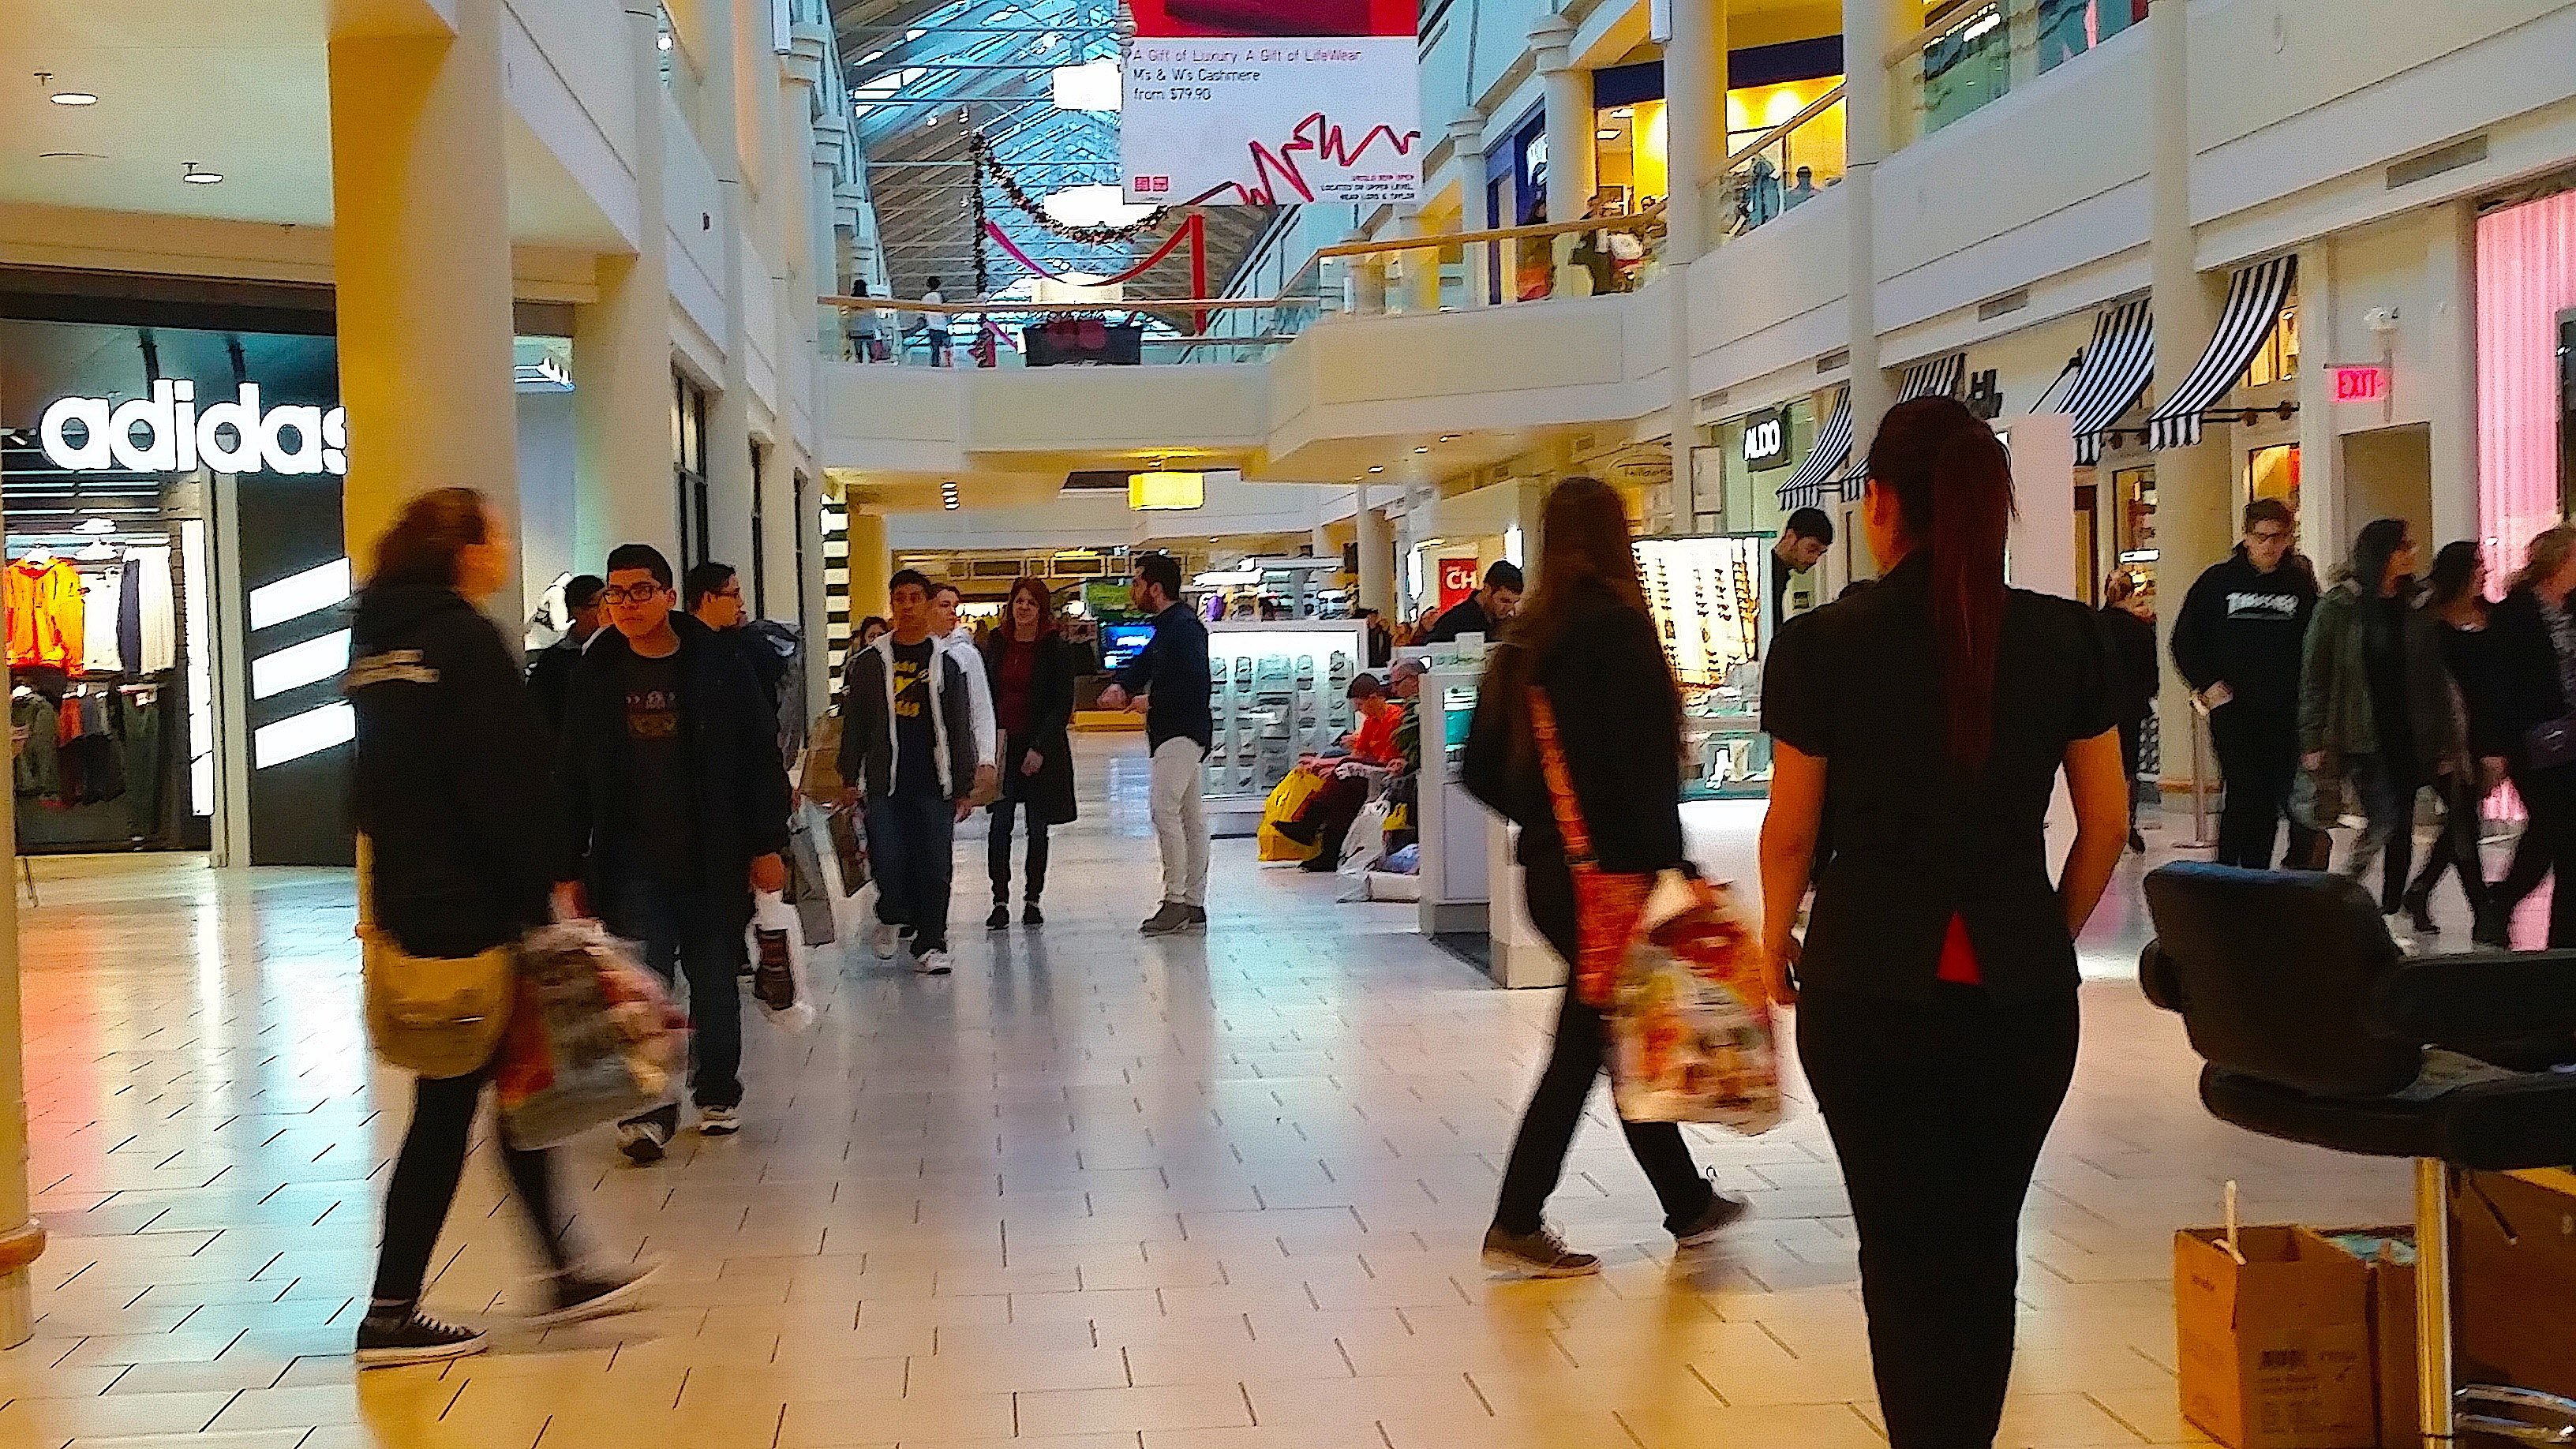 A busier Black Friday in New Jersey? (PHOTOS)